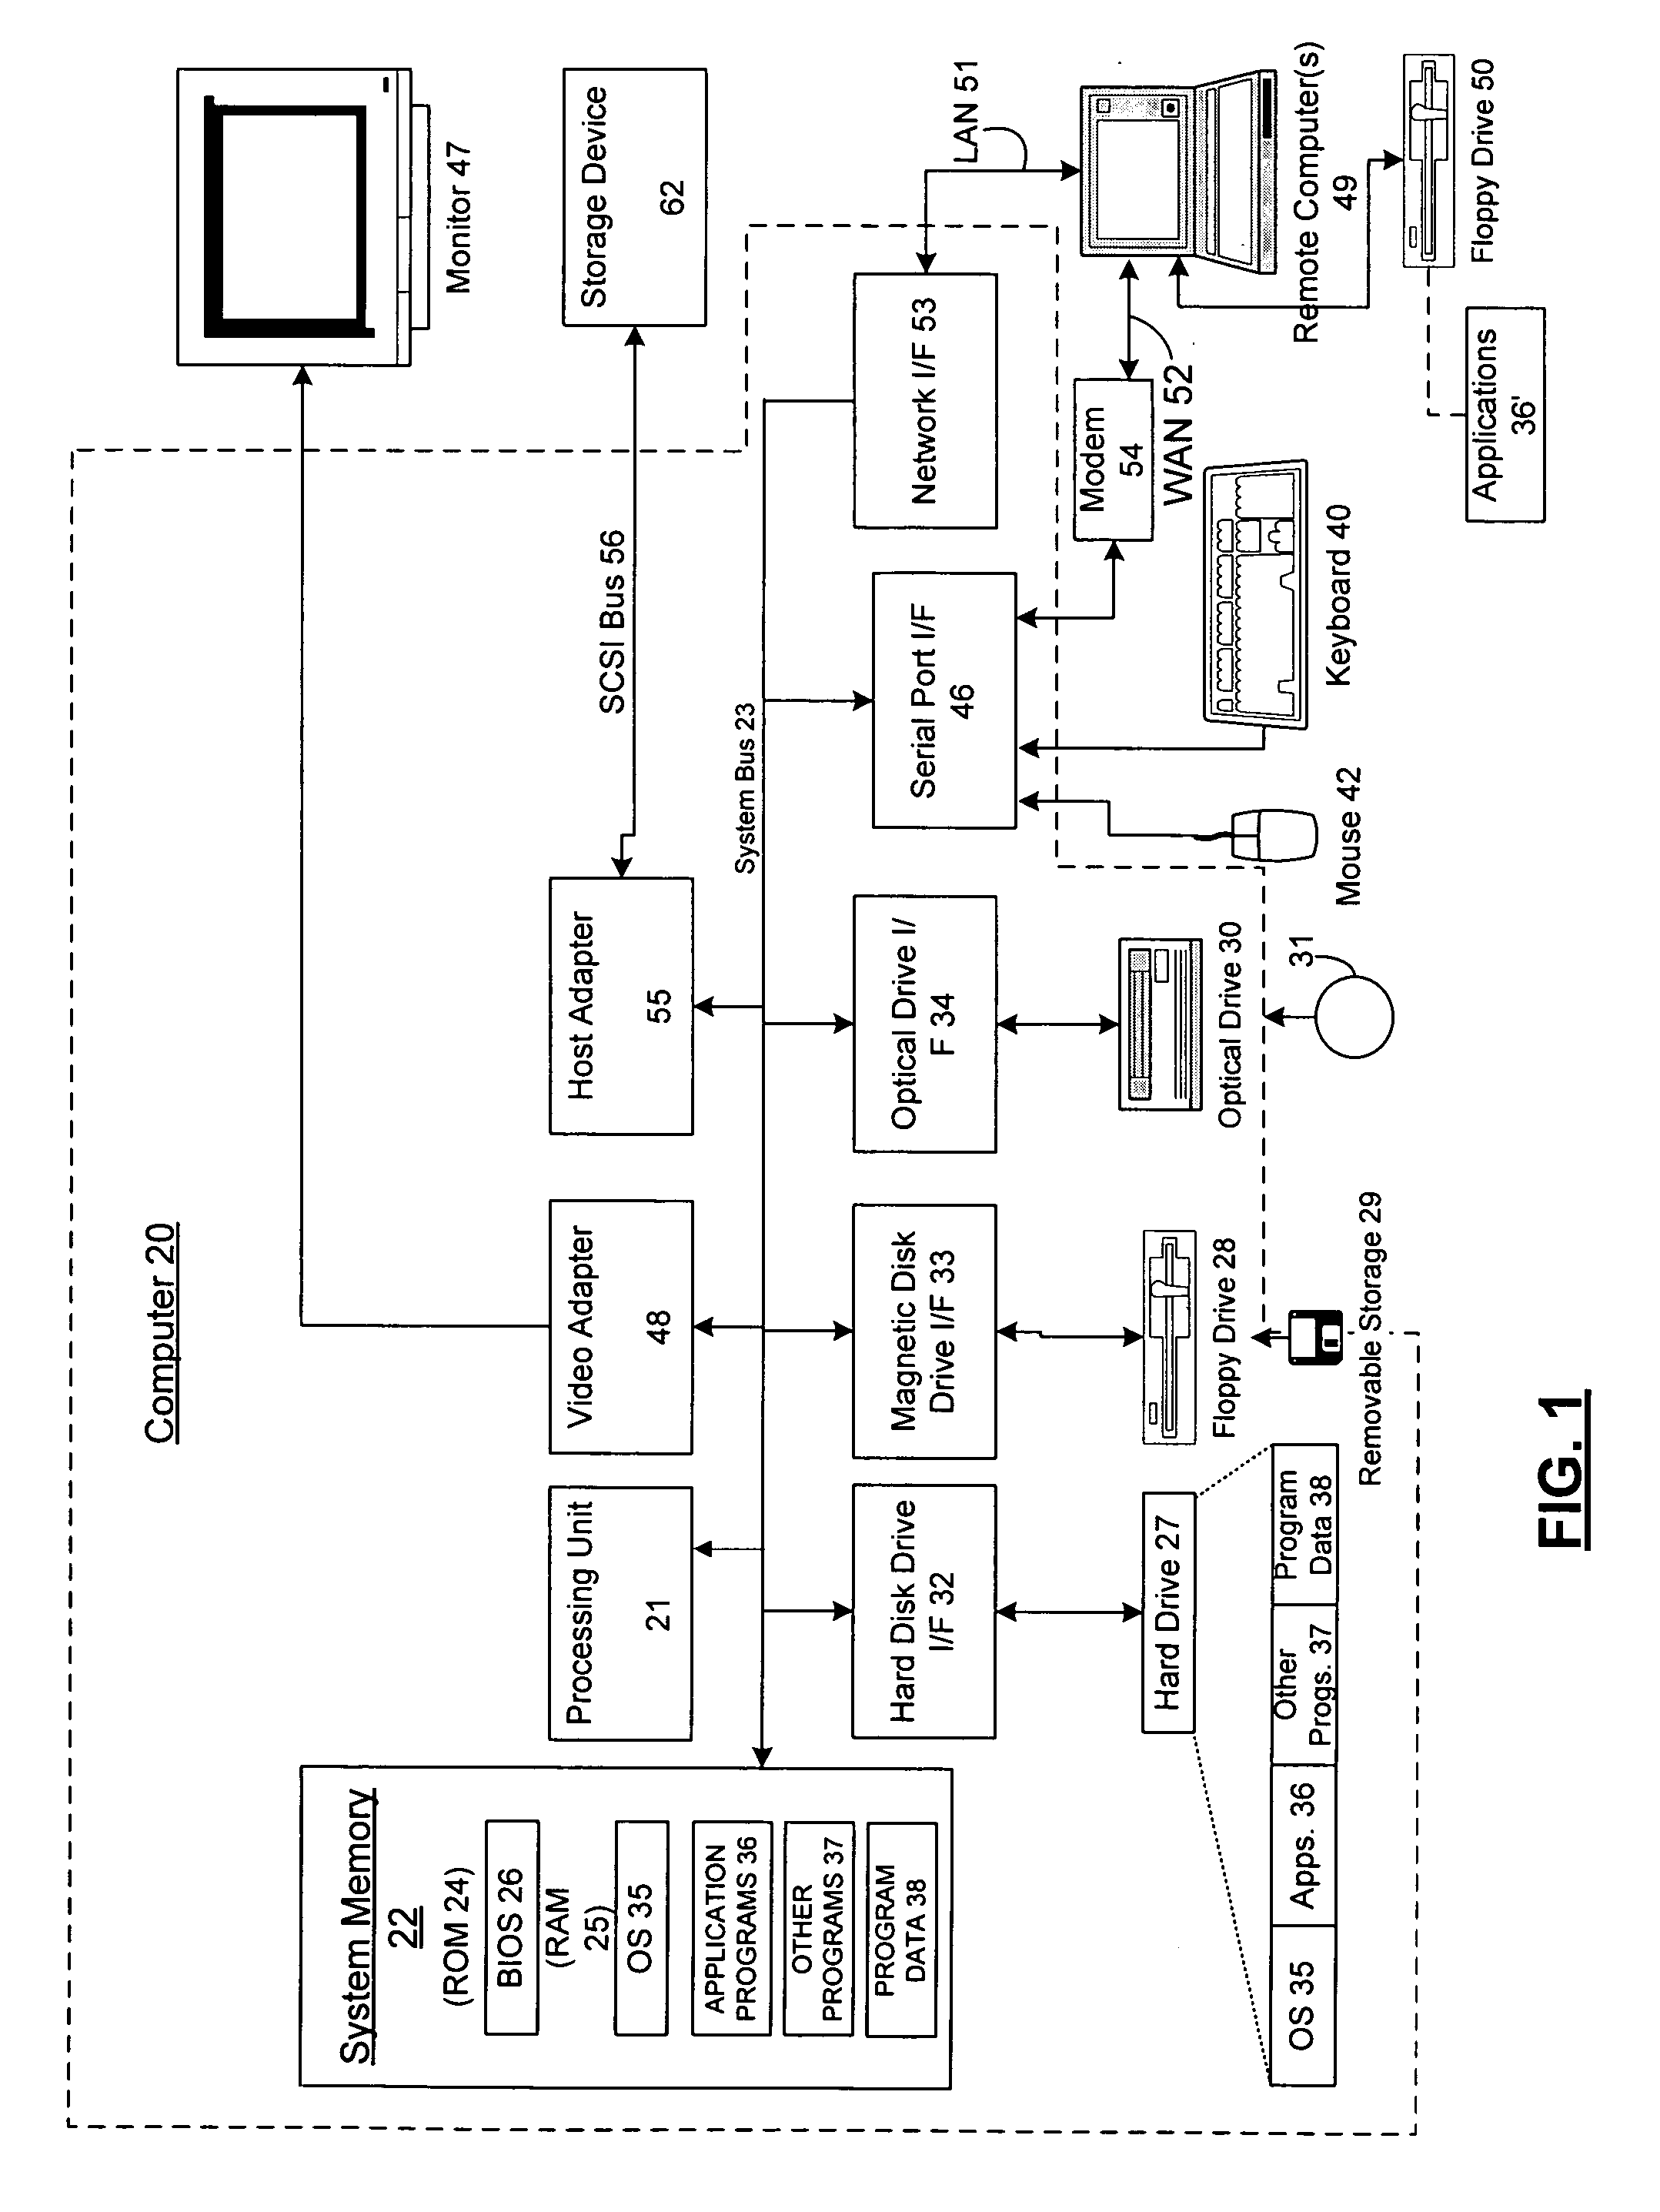 Systems and methods for exposing processor topology for virtual machines